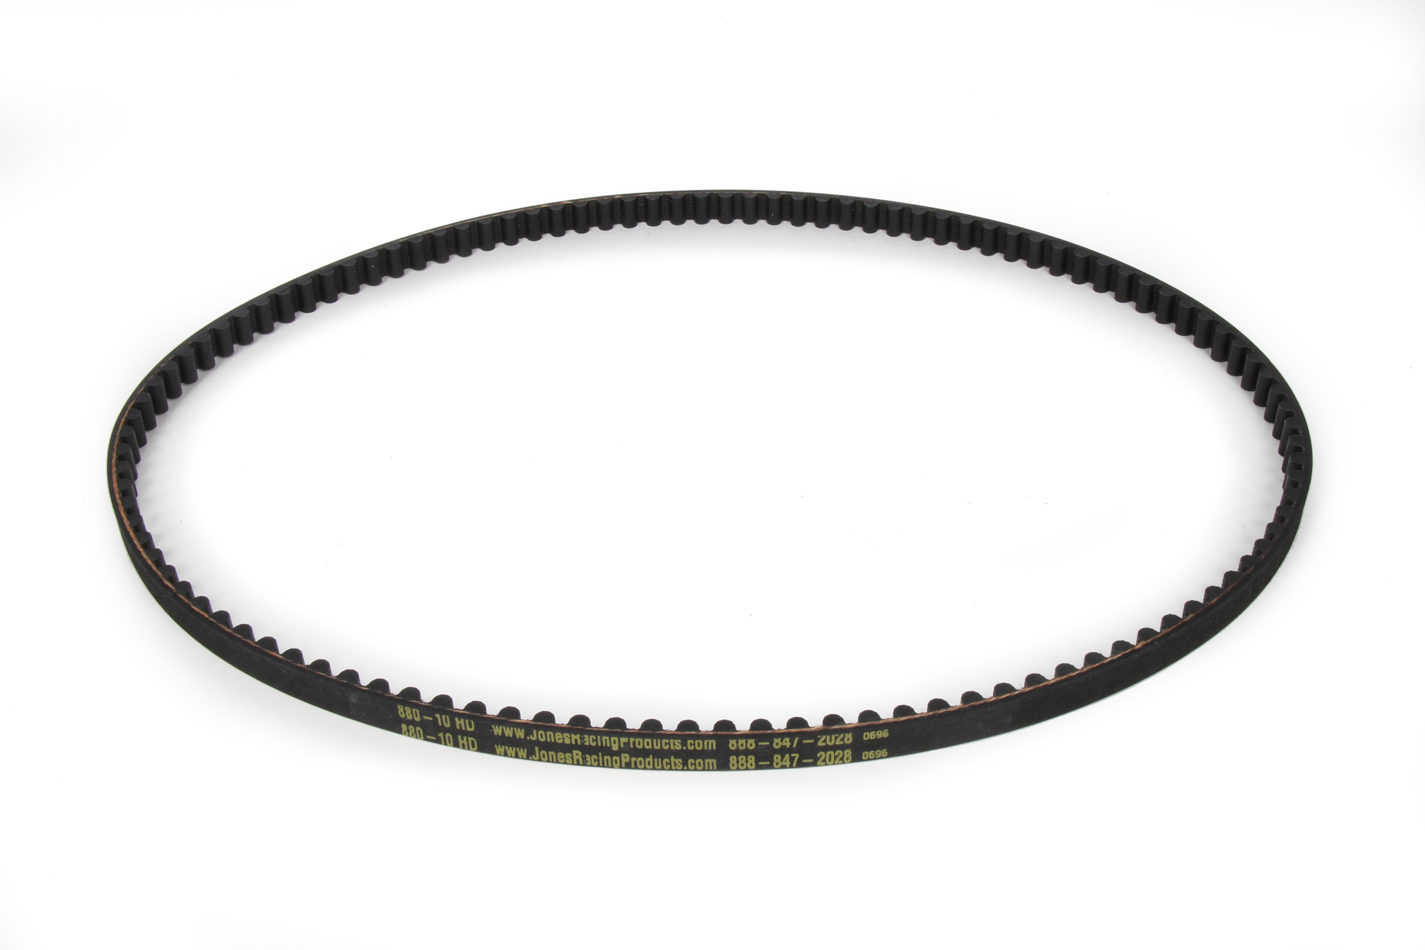 Jones Racing Products 880-10HD HTD Drive Belt, 34.650 in Long, 10 mm Wide, 8 mm Pitch, Each